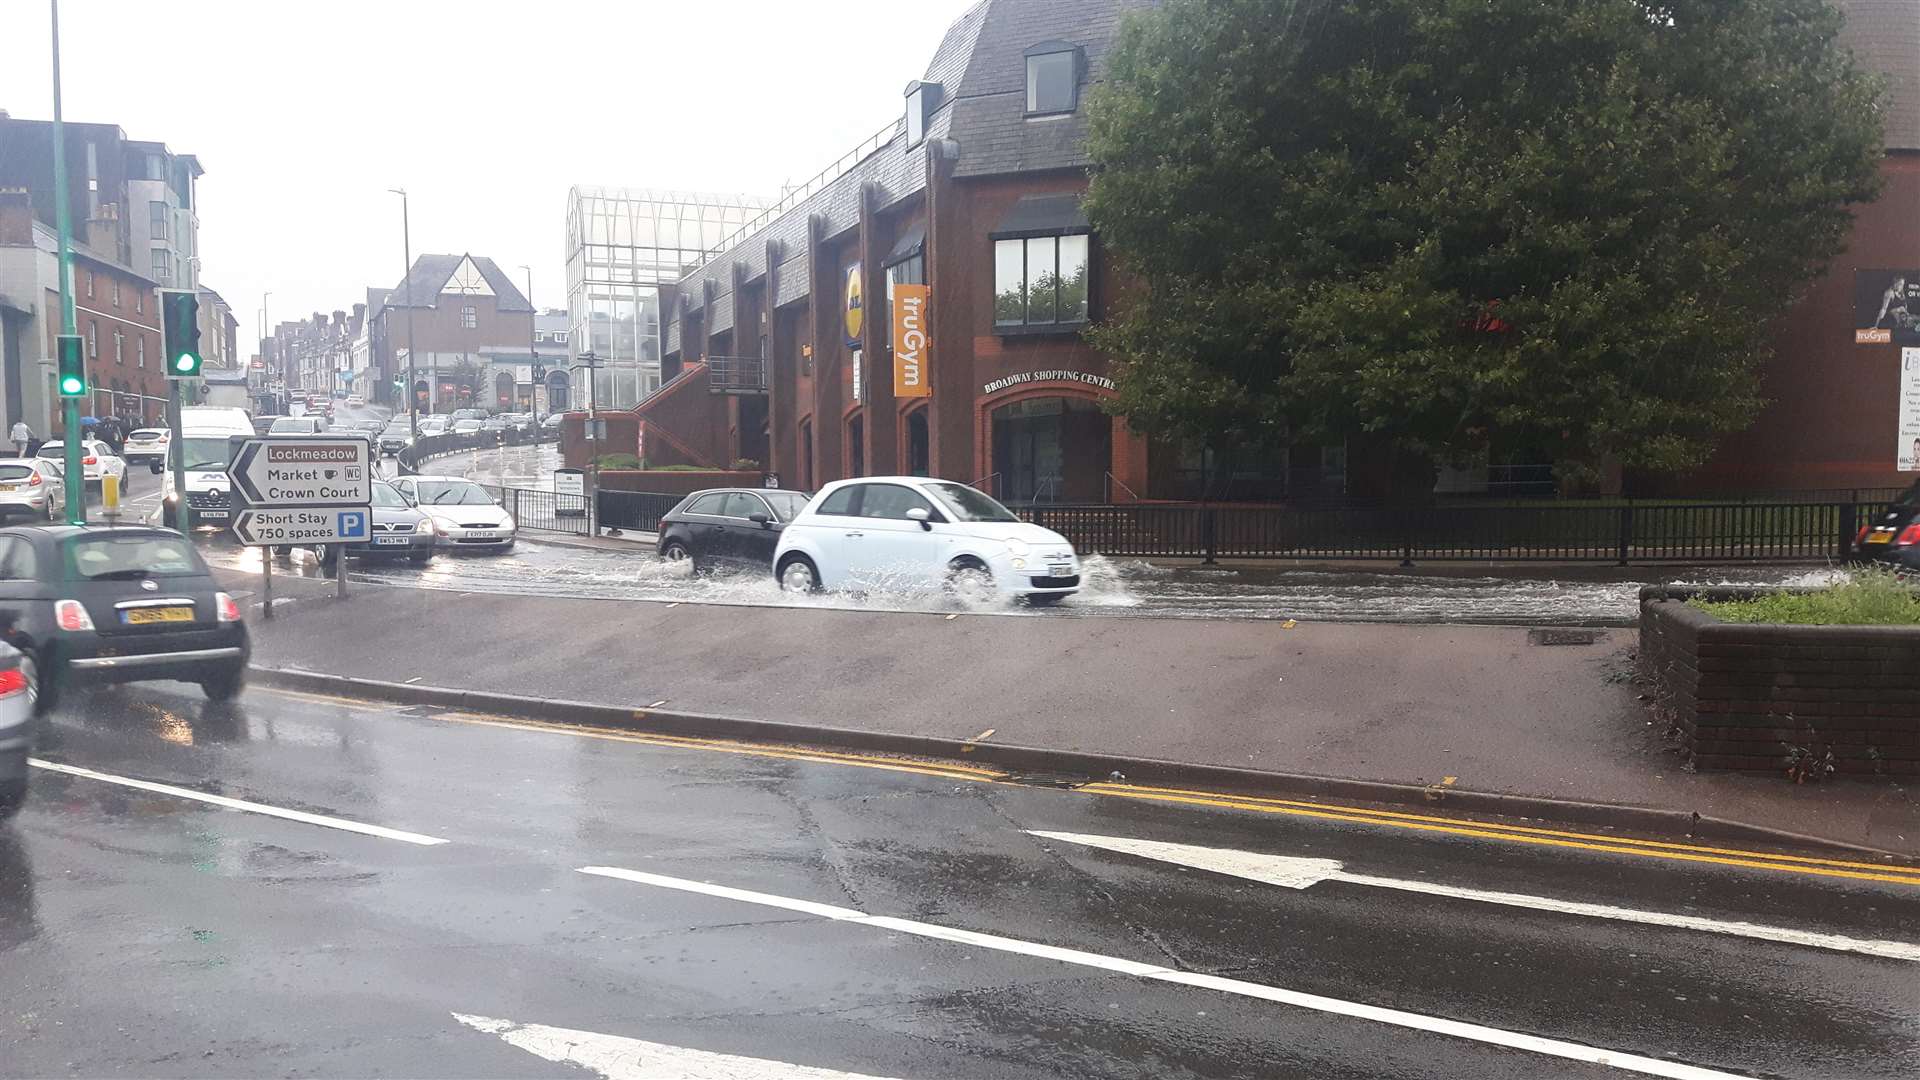 Cars drove through puddles of water by the gyratory